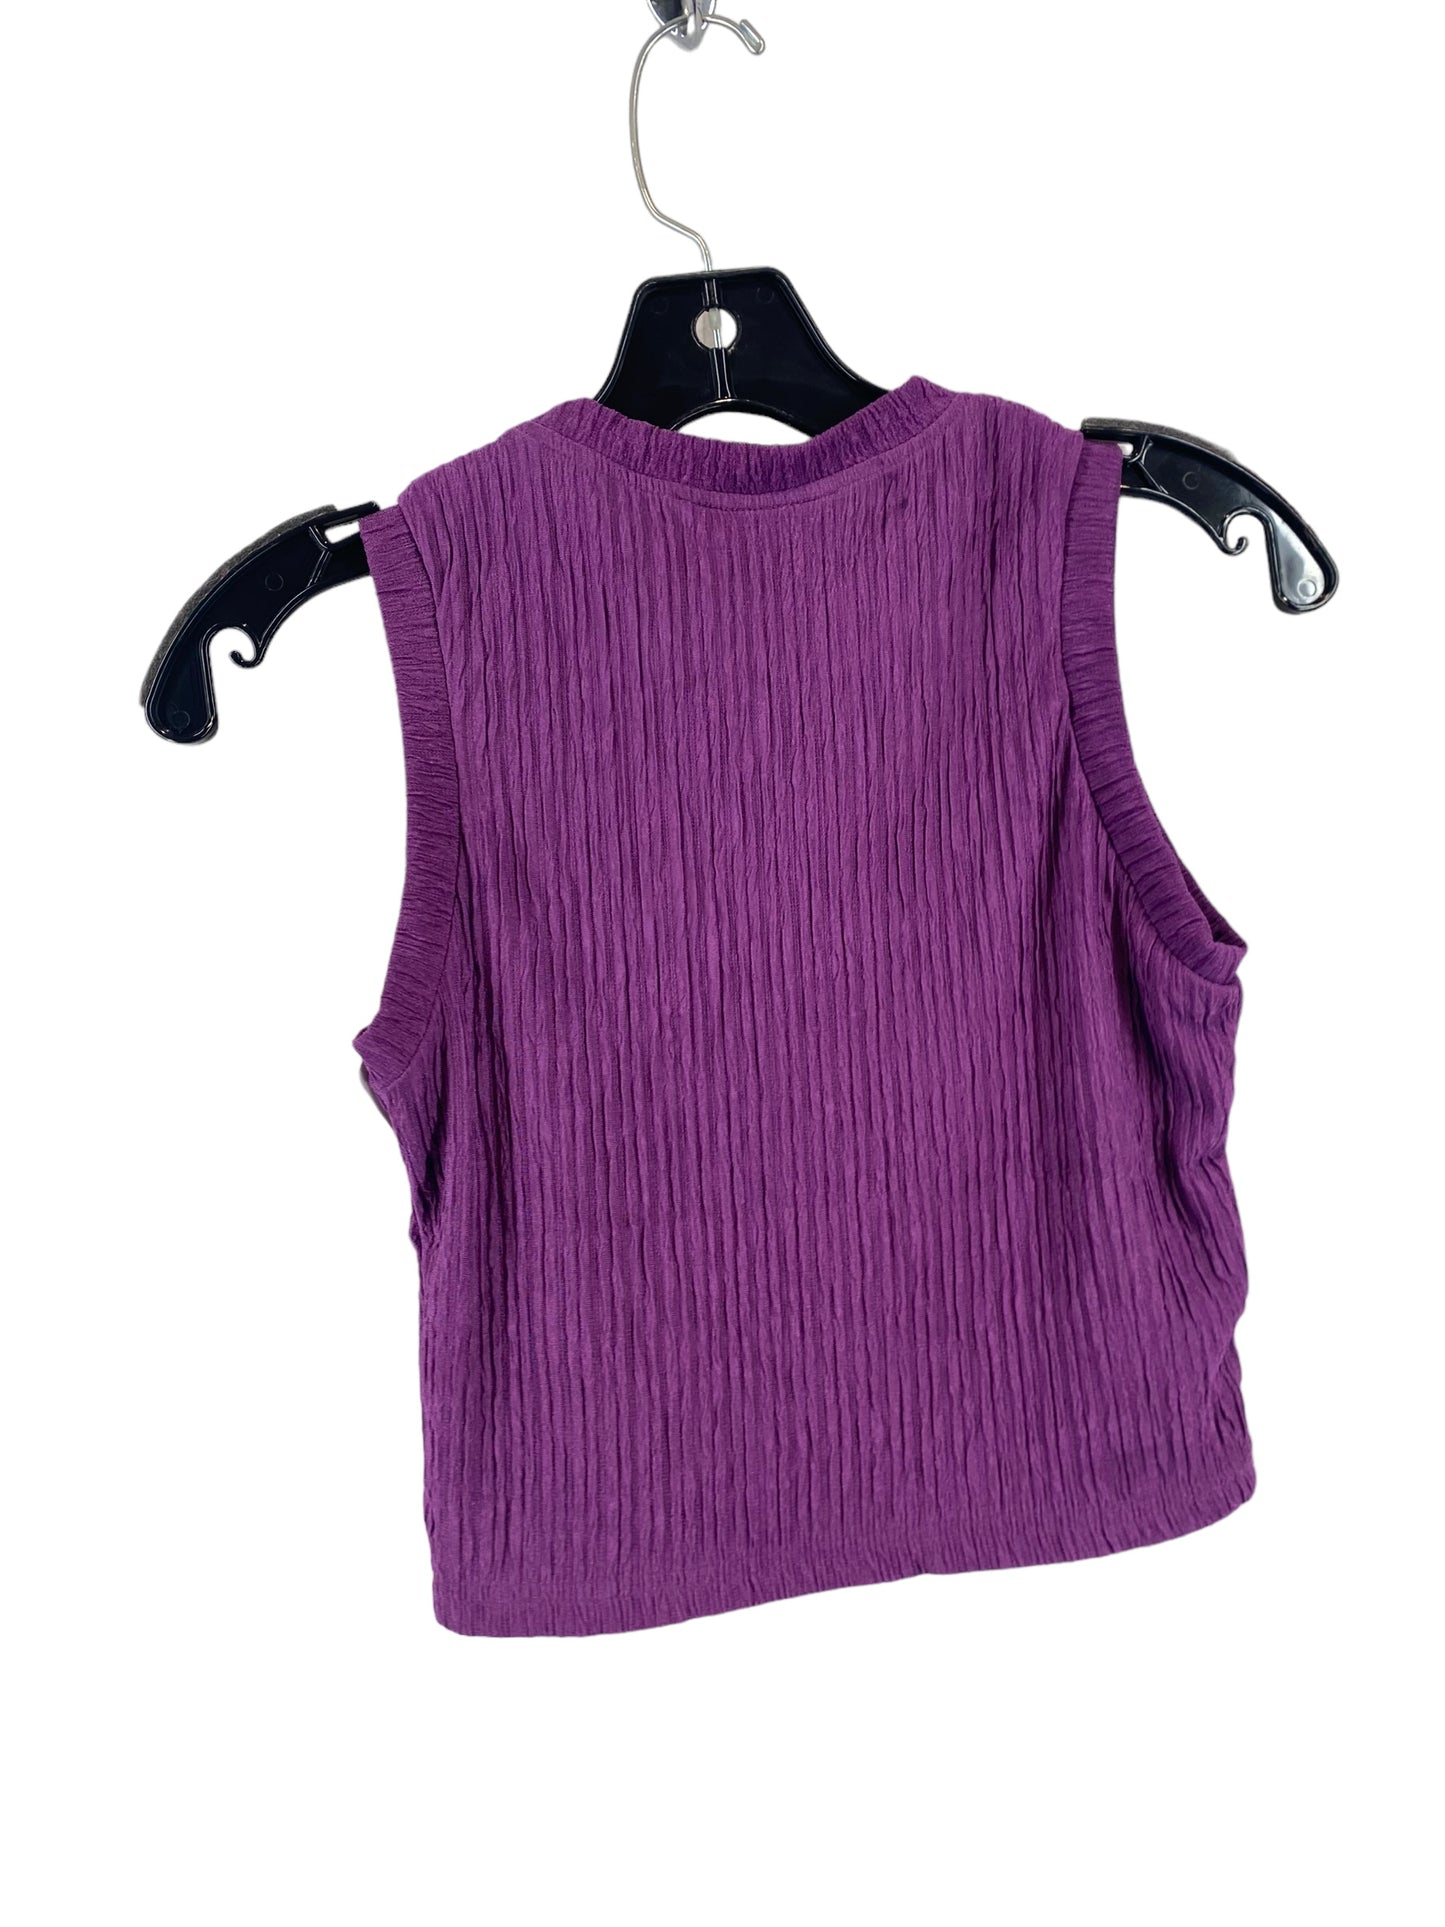 Top 2pc Sleeveless By Clothes Mentor  Size: S